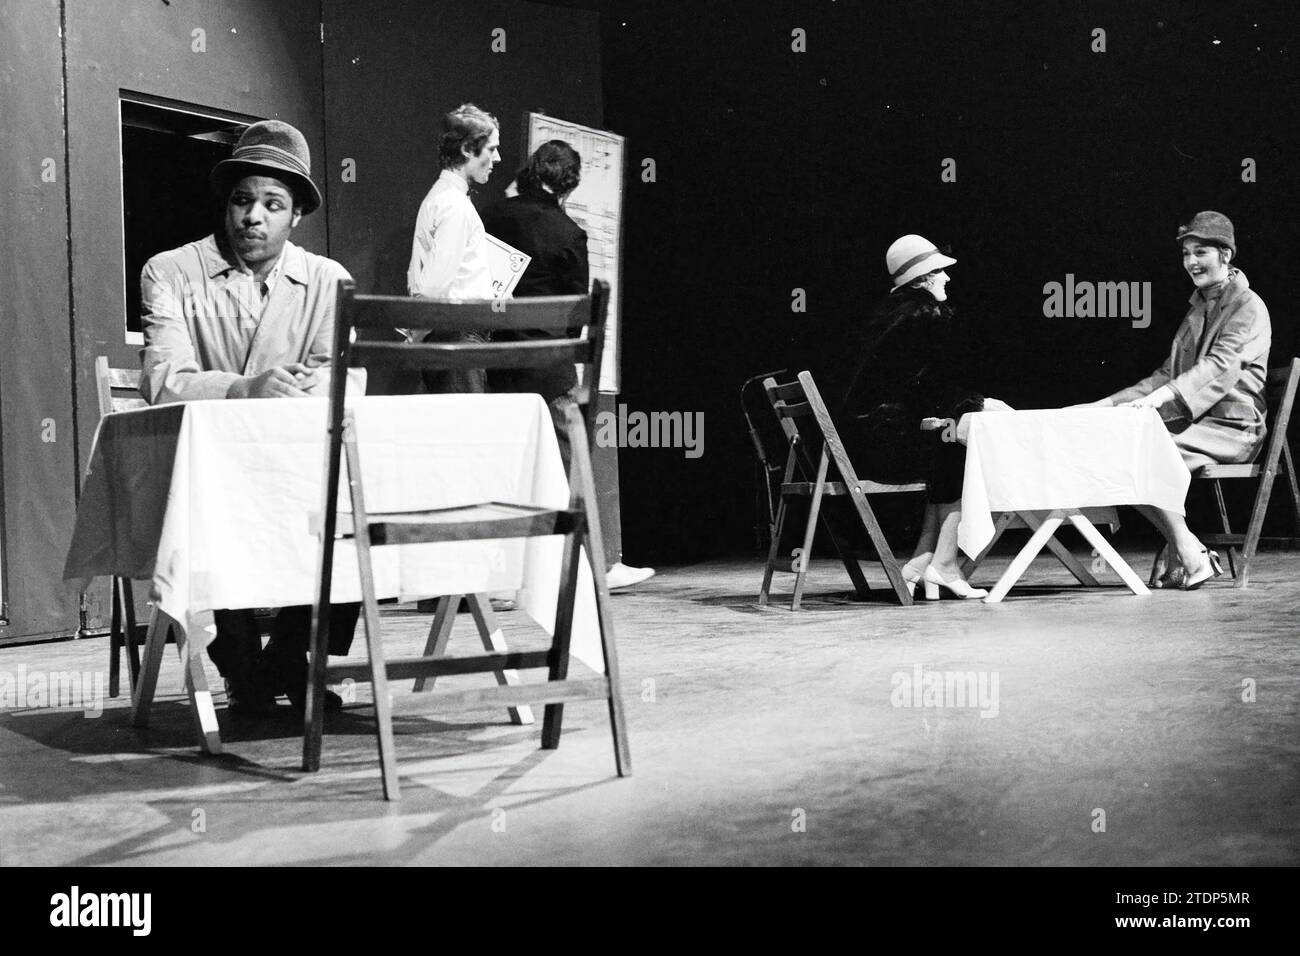 Theater performance for schoolchildren, Mime performance Ko de Kat, 22-04-1977, Whizgle News from the Past, Tailored for the Future. Explore historical narratives, Dutch The Netherlands agency image with a modern perspective, bridging the gap between yesterday's events and tomorrow's insights. A timeless journey shaping the stories that shape our future Stock Photo